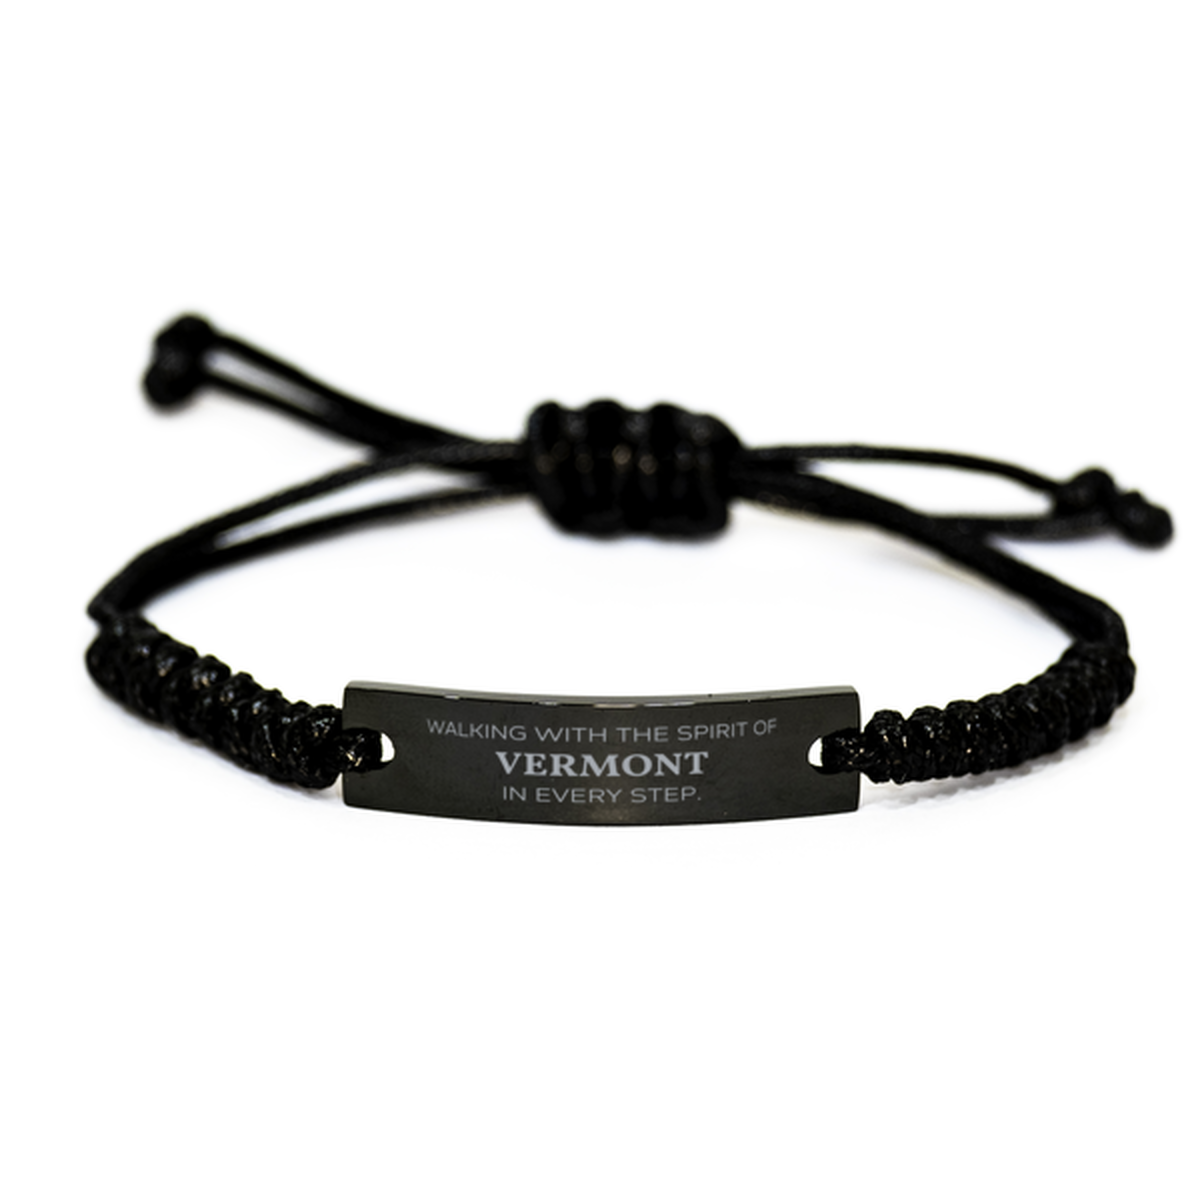 Vermont Gifts, Walking with the spirit, Love Vermont Birthday Christmas Black Rope Bracelet For Vermont People, Men, Women, Friends